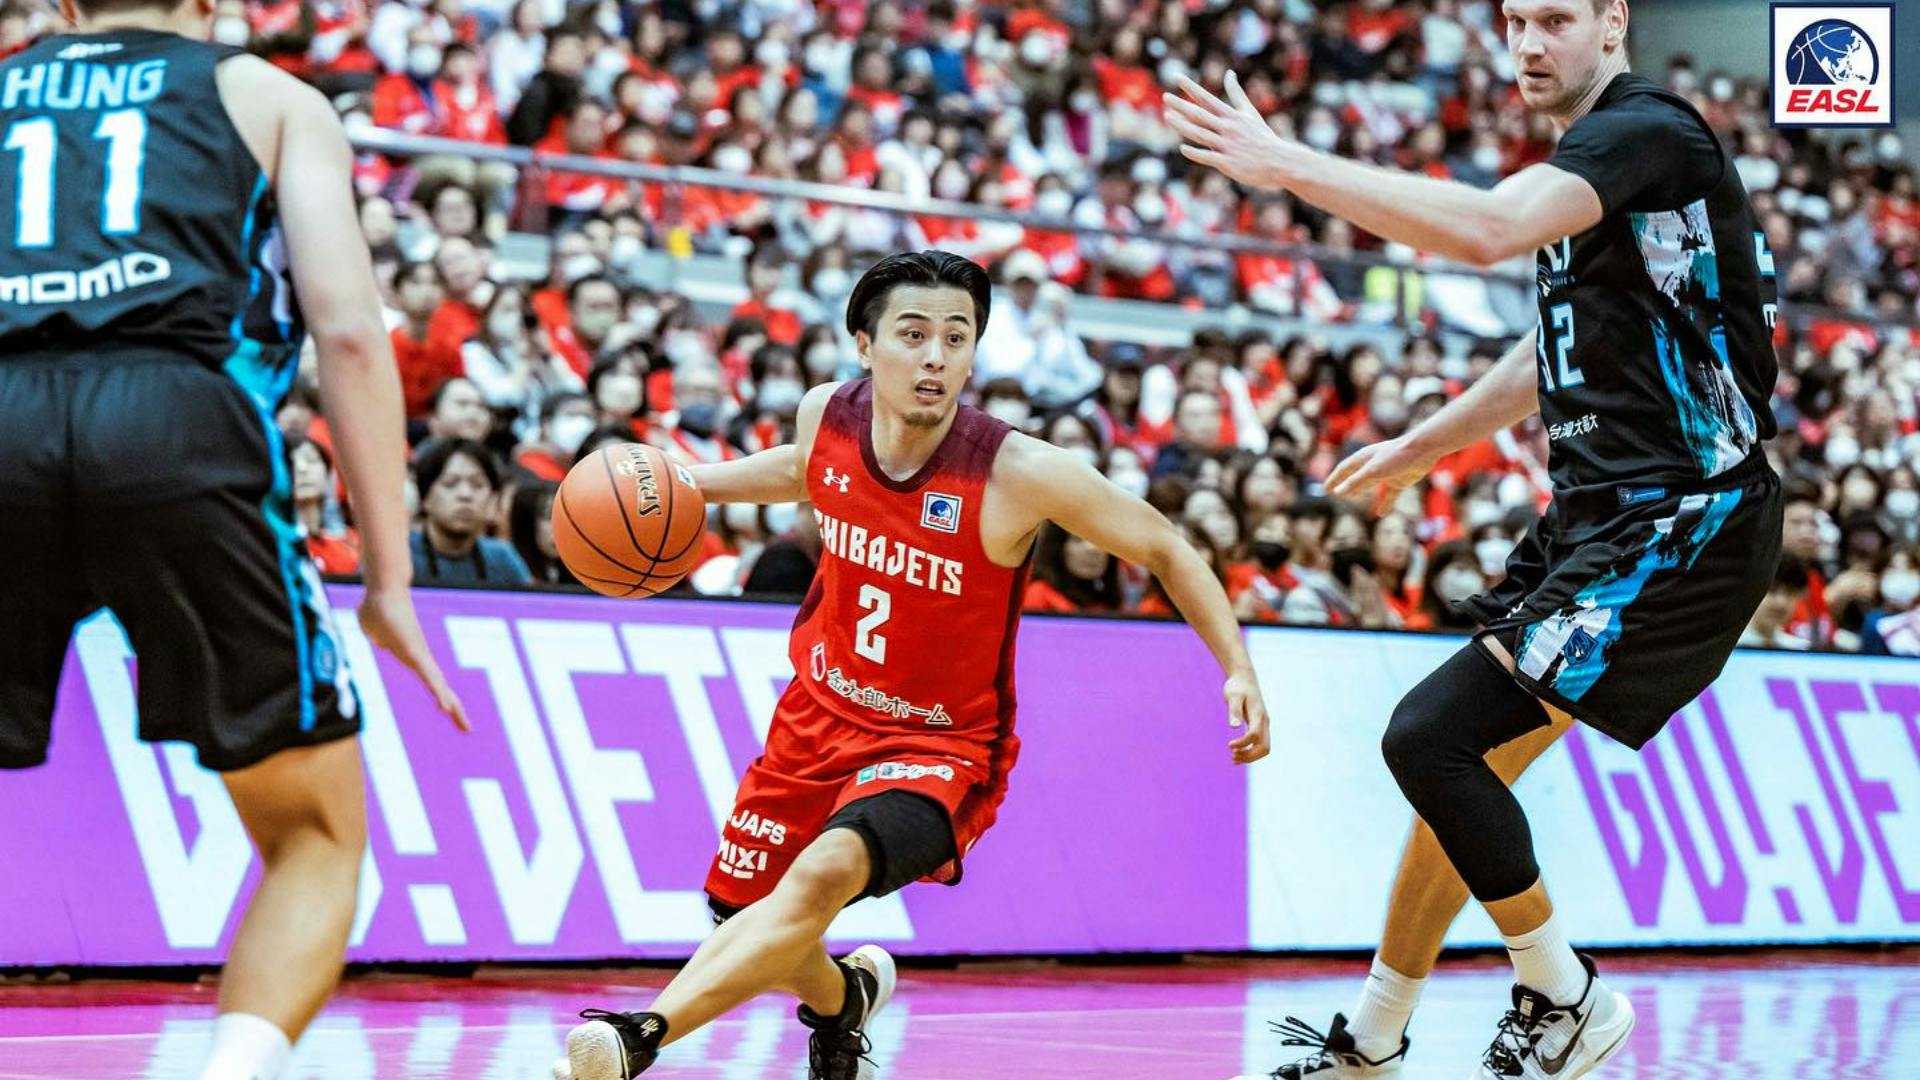 Lin brothers wary of Chiba and "head of the snake" Yuki Togashi for EASL semis